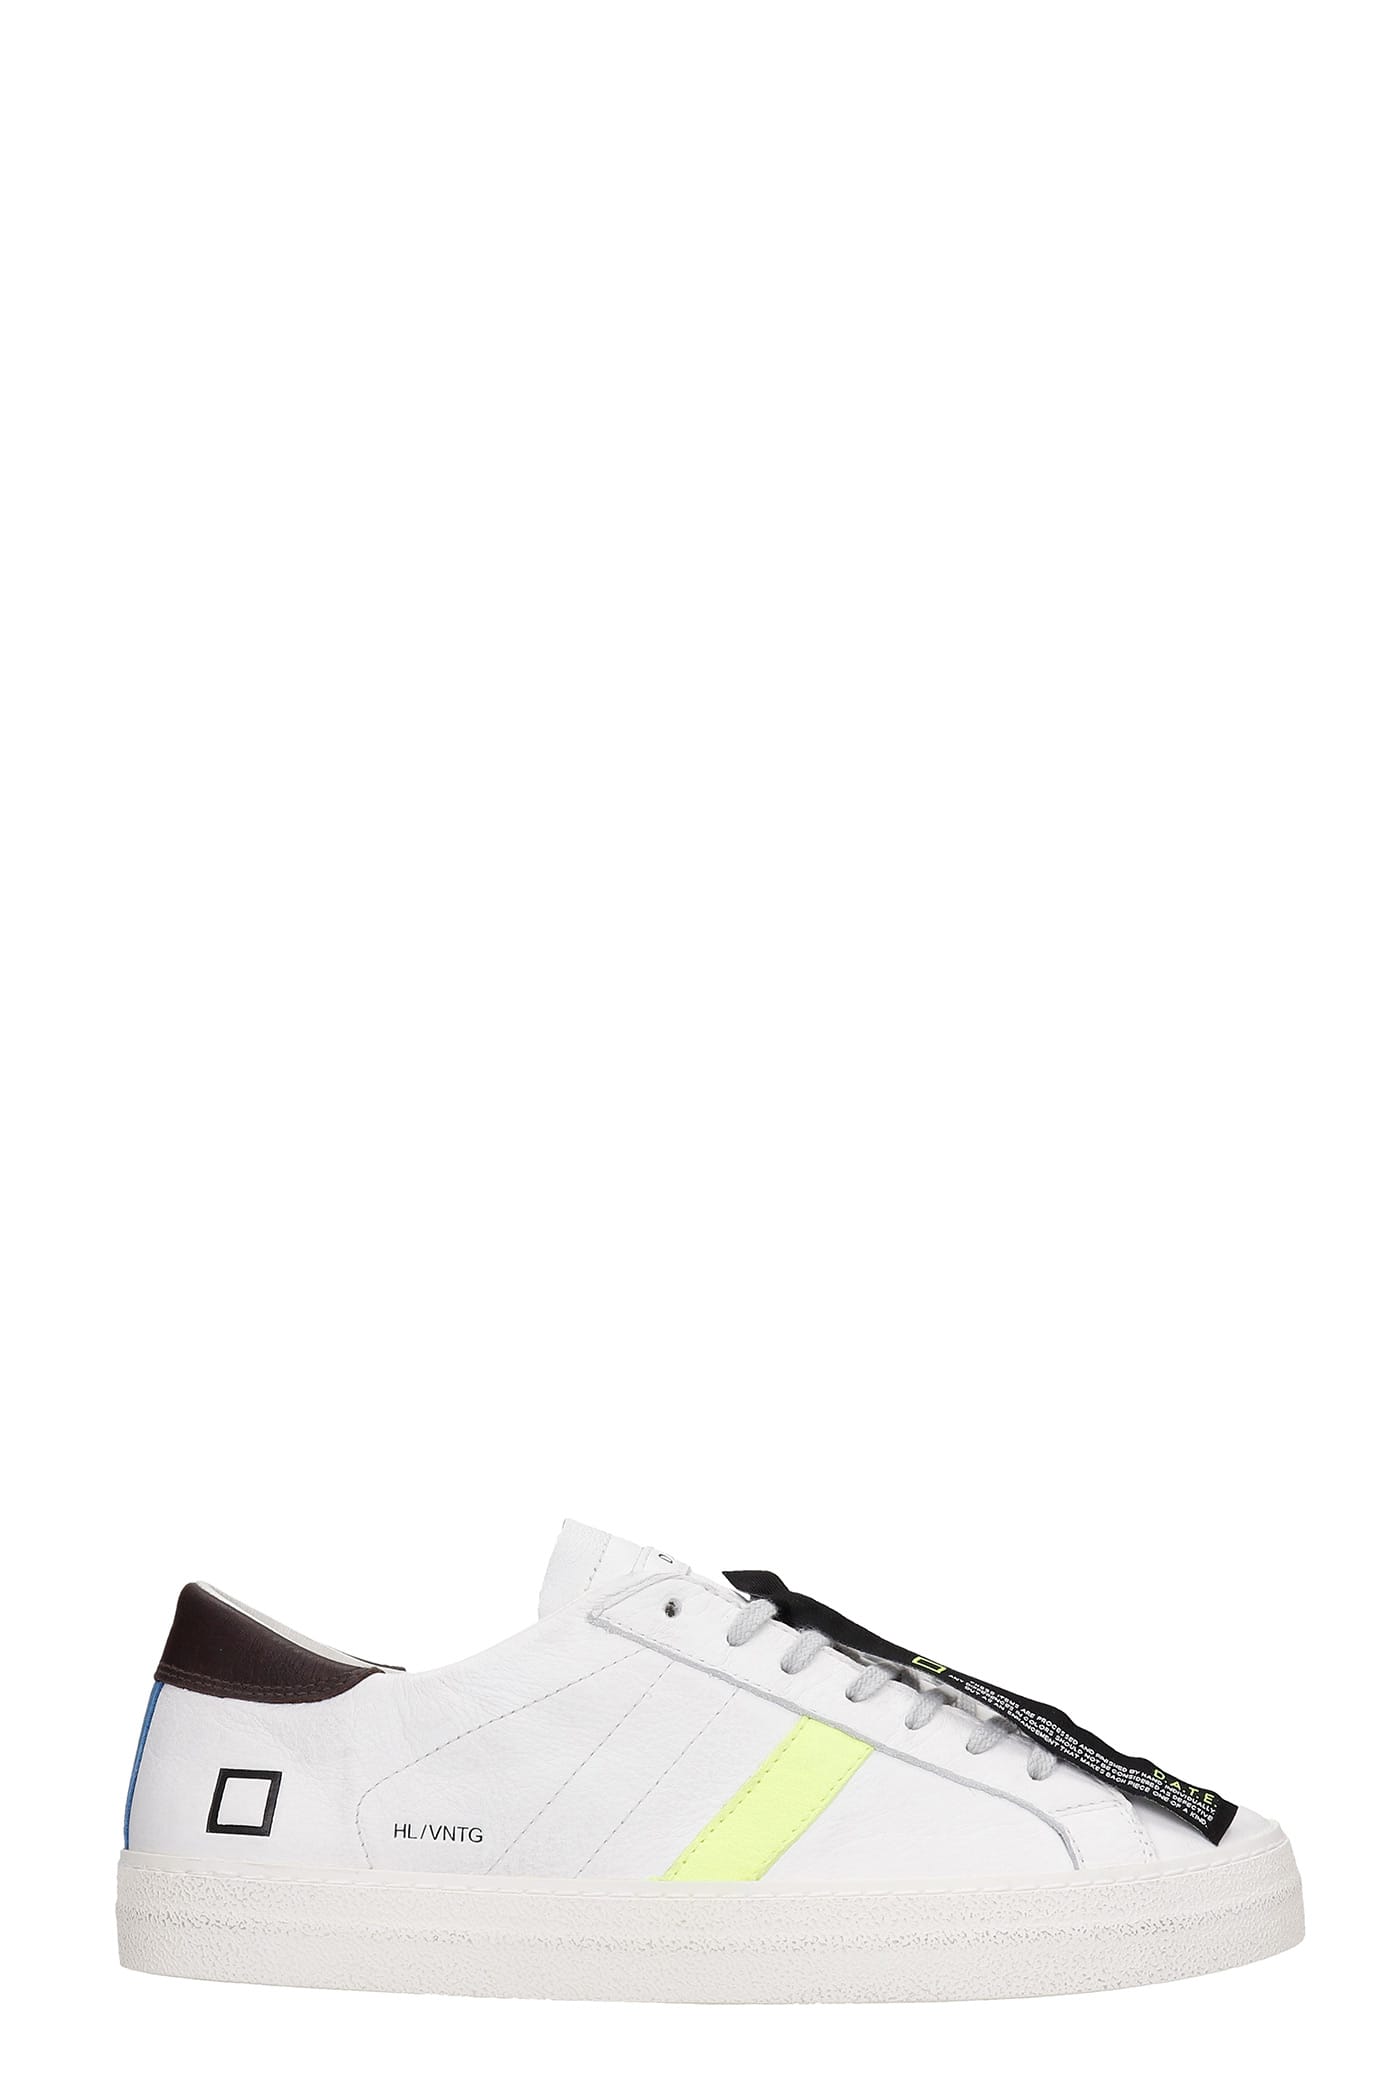 Hill Low Sneakers In White Leather D.A.T.E.